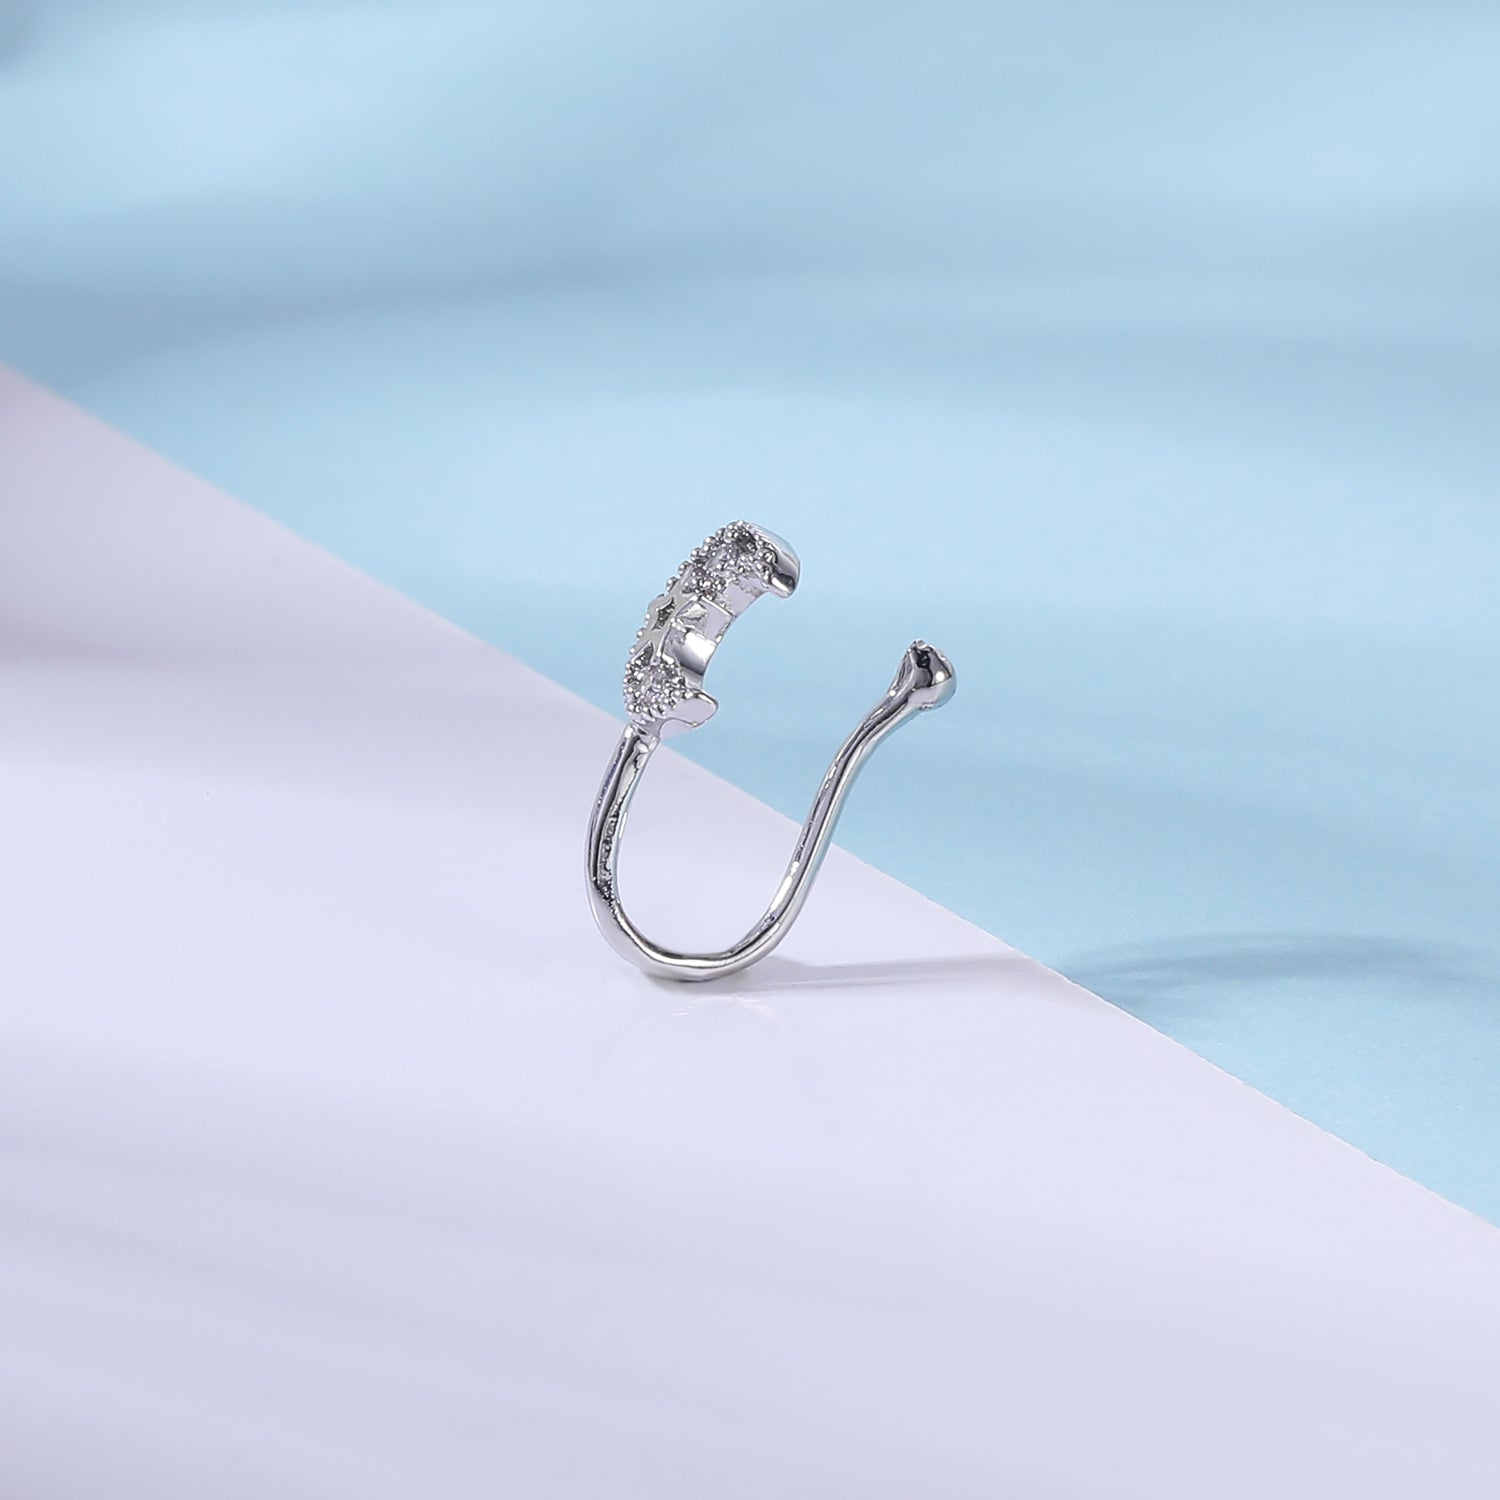 zs-white-zircon-moon-u-shaped-nose-clip-simple-stainless-steel-fake-nose-ring